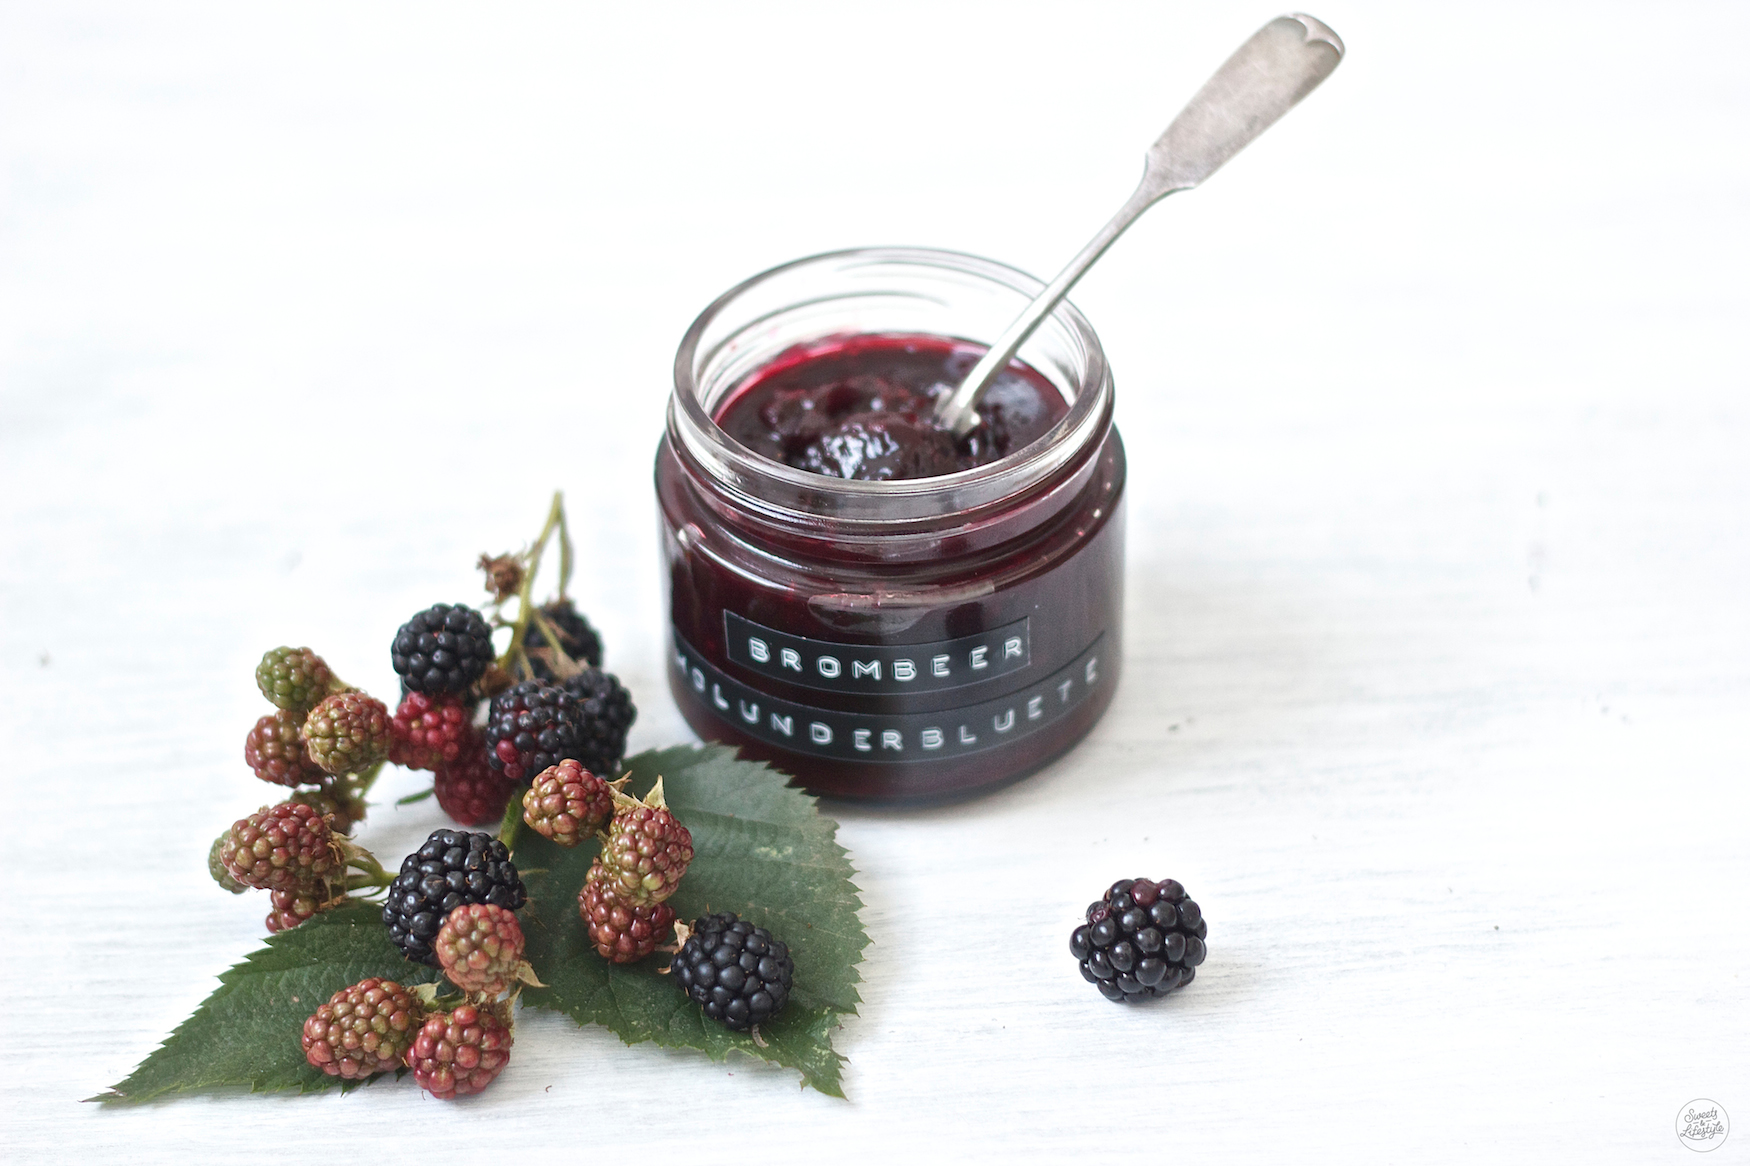 Brombeer Holunderblüten Marmelade - Sweets and Lifestyle